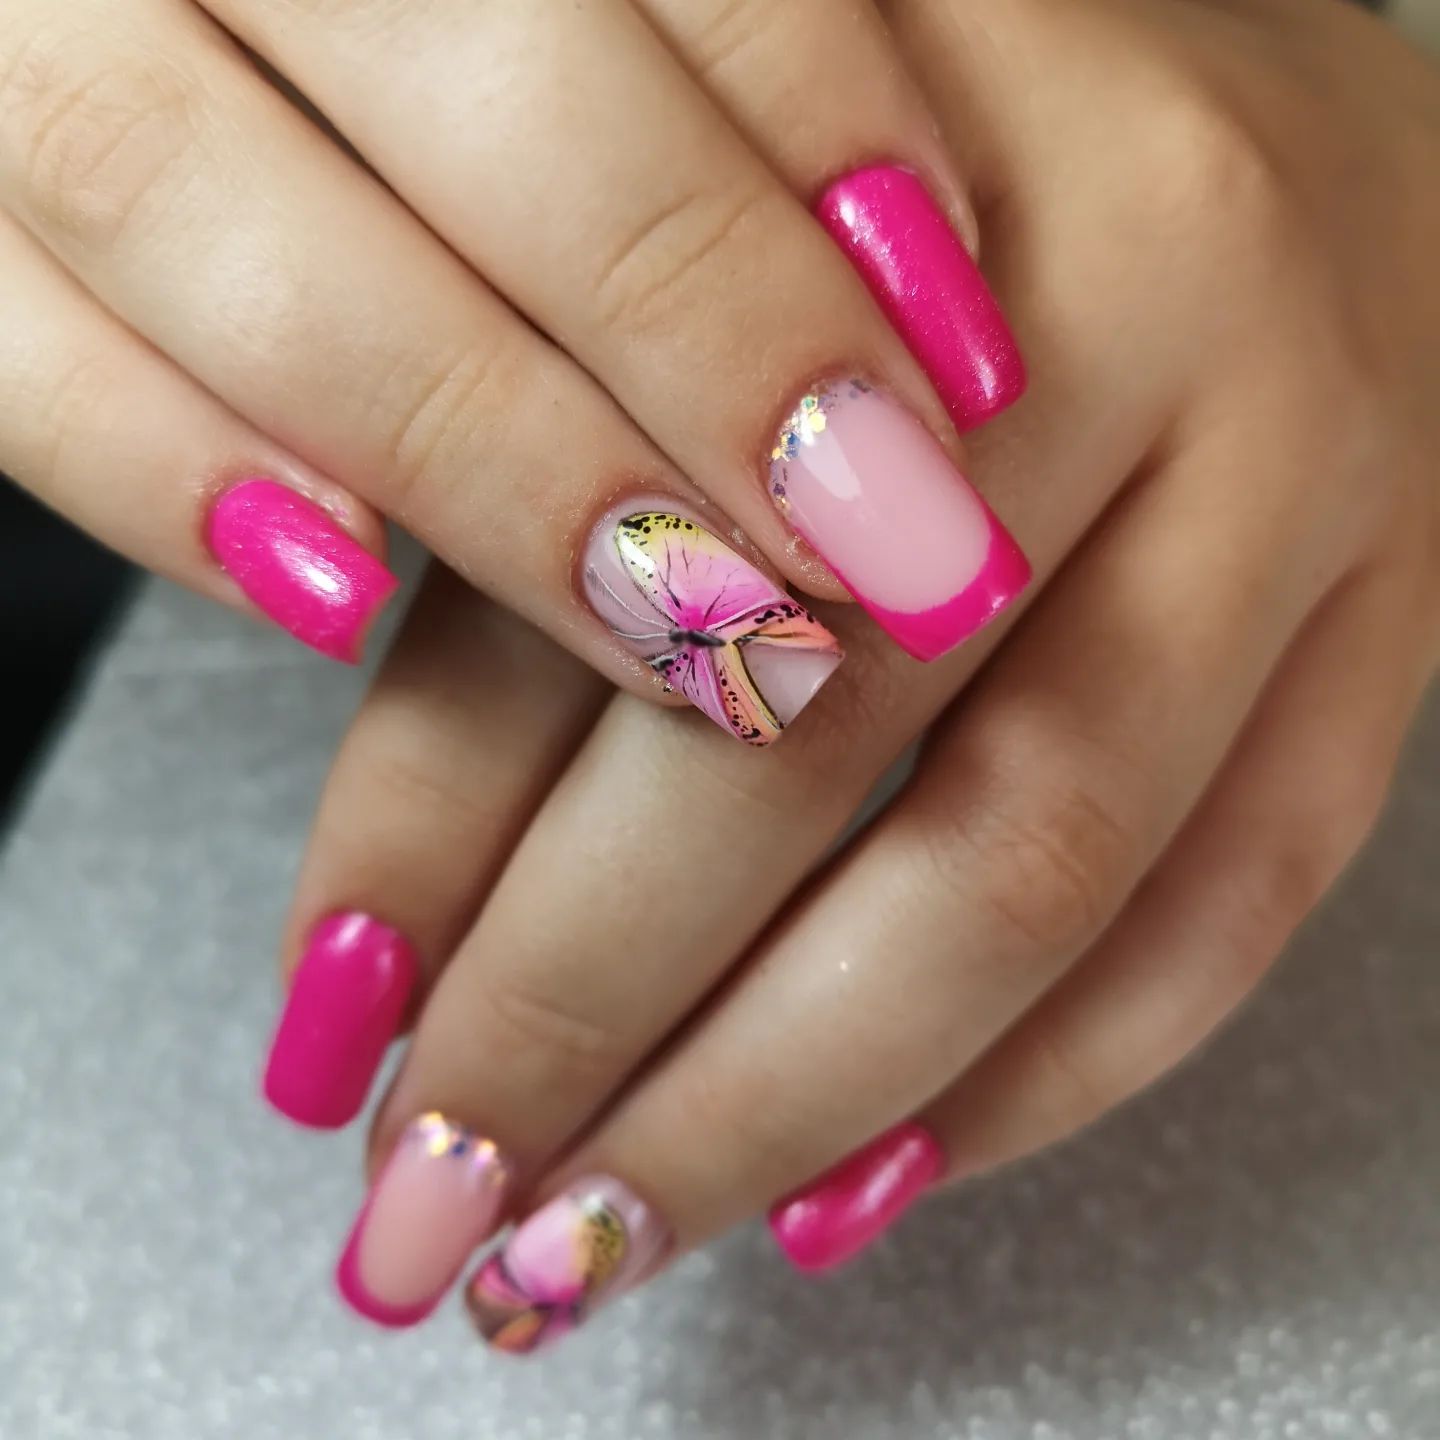 If you don't want to cover all of your nails with butterflies, here is a great idea. One pinky butterfly on one of your nails will look great.